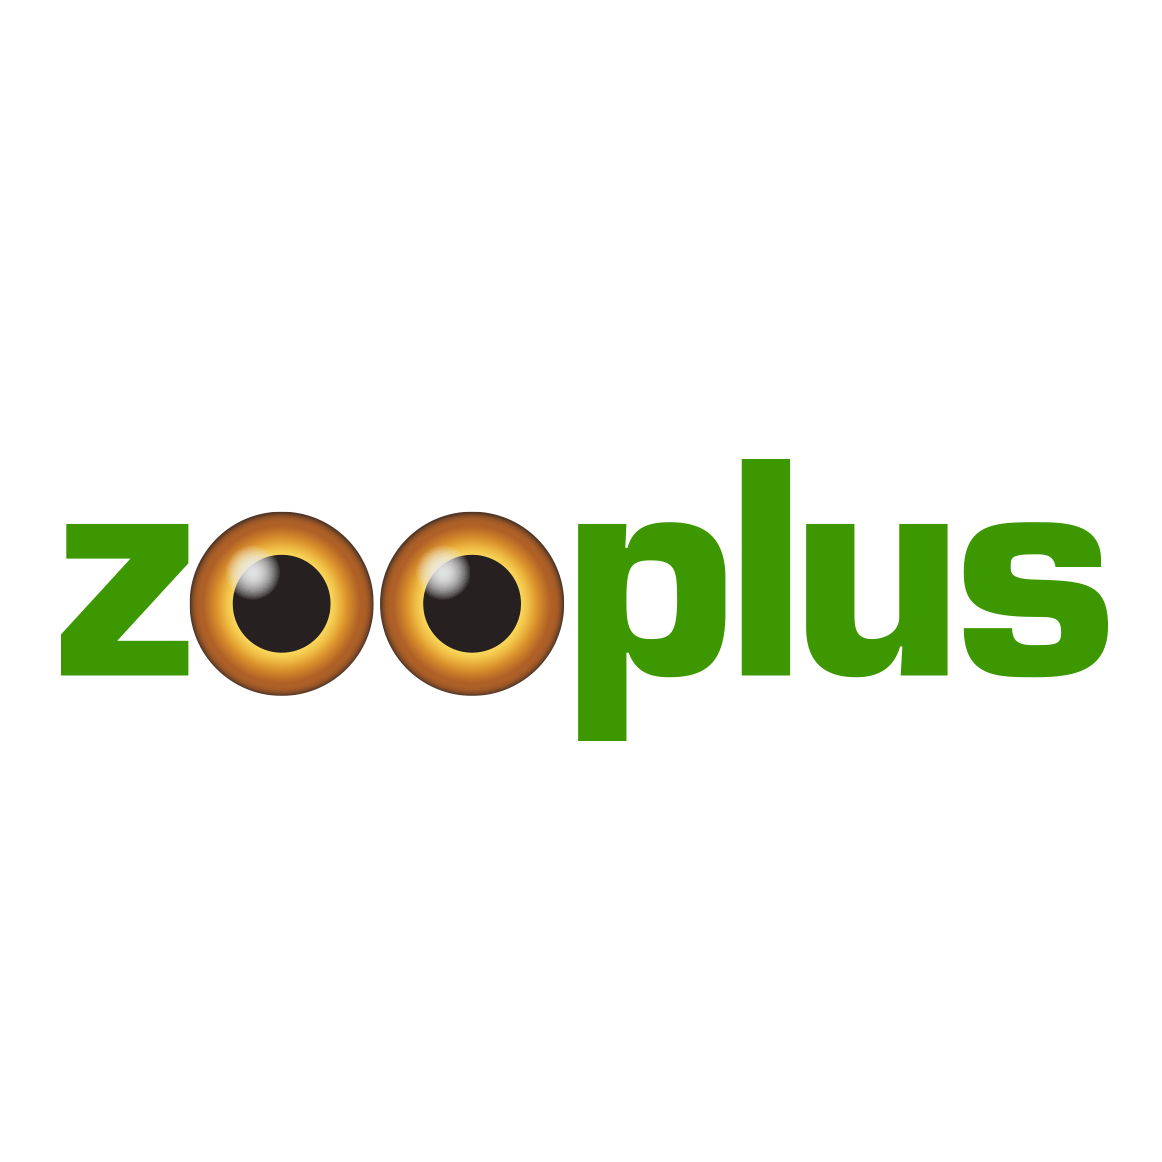 zooplus coupon codes, promo codes and deals